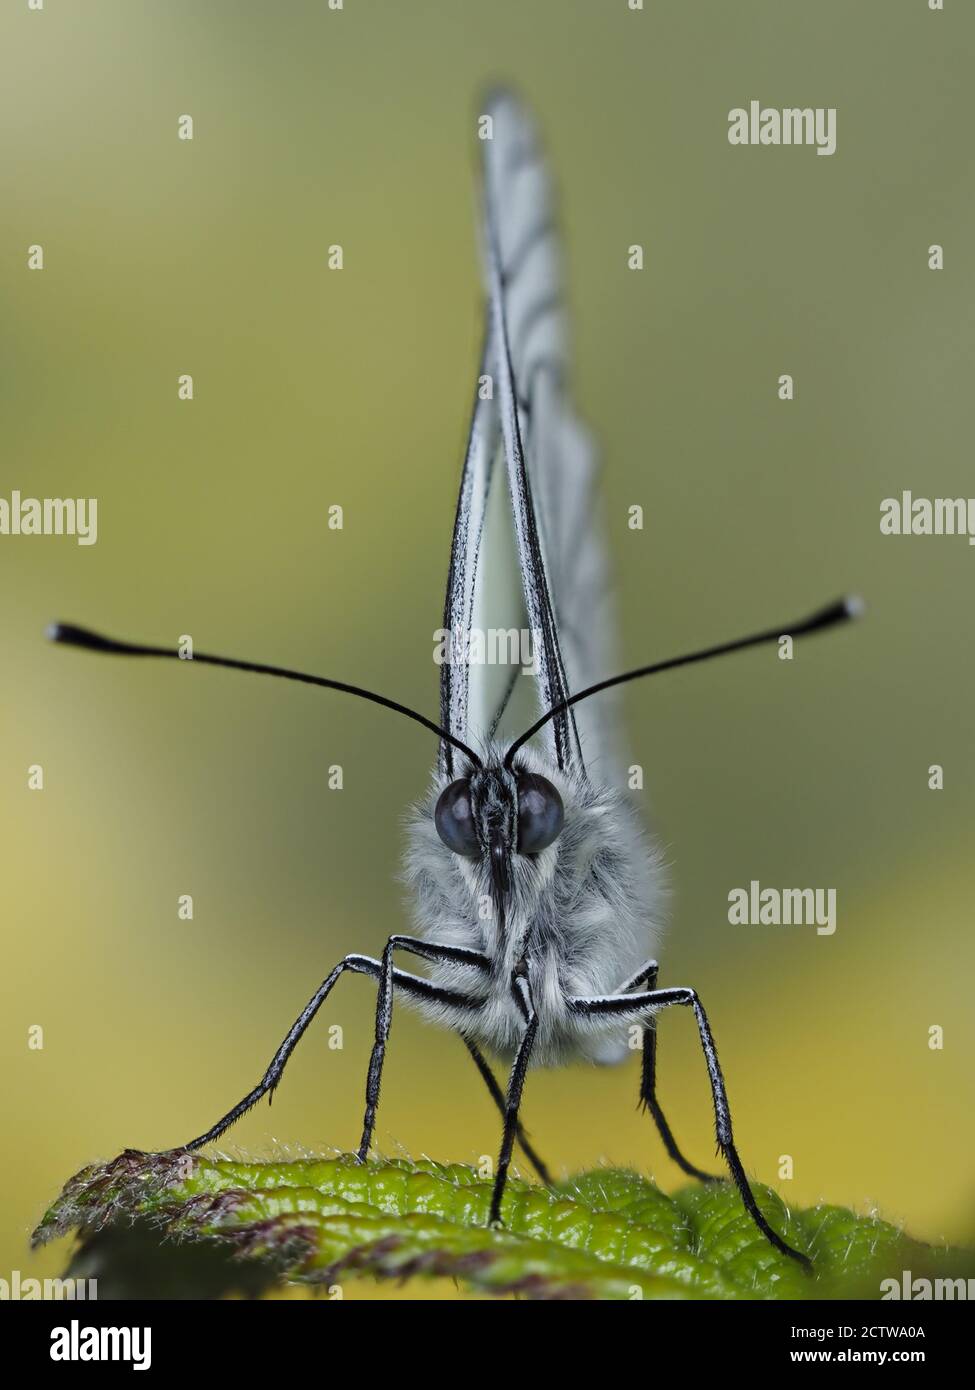 Black veined white butterfly (Aporia crataegi), stacked focus image, UK, controlled situation Stock Photo